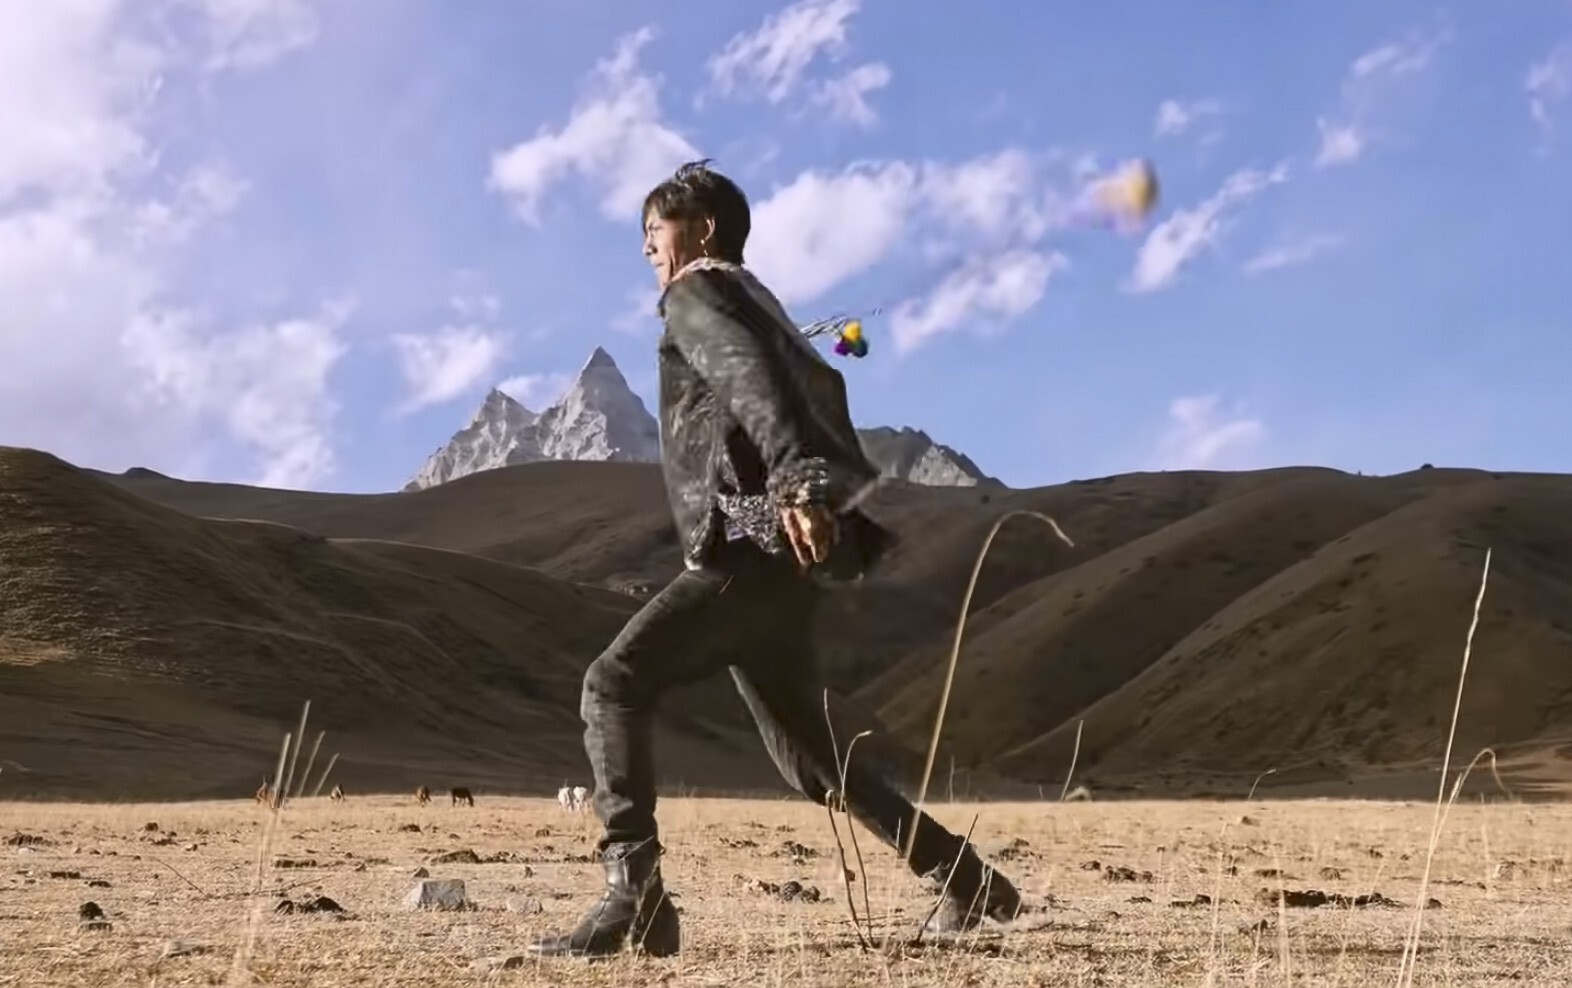 Zhaxi Dingzhen, a 20-year-old Tibetan herdsman from Sichuan, is an internet sensation after a 10-second video showcasing what fans describe as his rugged appearance went viral. A local travel agency quickly hired him as an “image ambassador”. Photo: YouTube